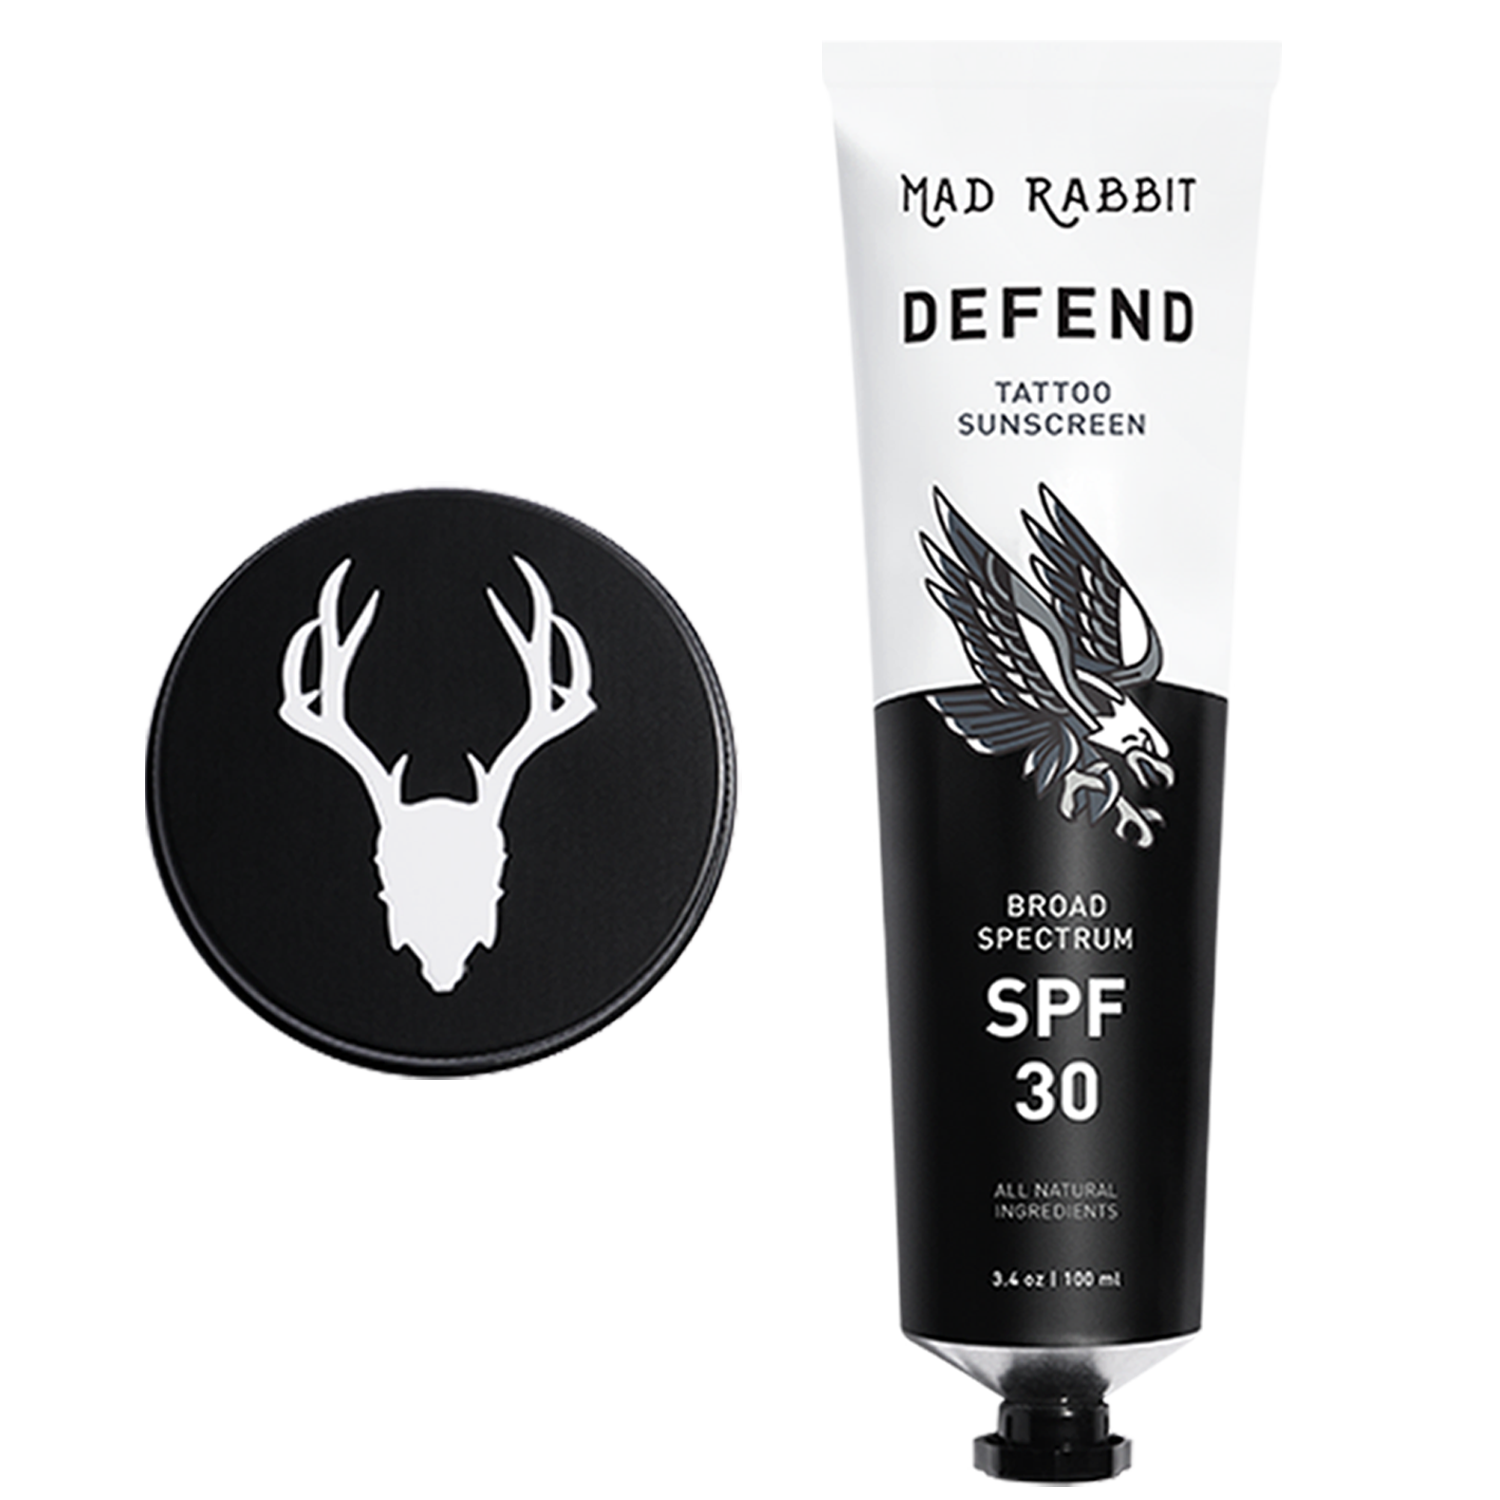 Amazon.com: Mad Rabbit Repair Tattoo Aftercare Soothing Gel and Moisturizer  for New Tattoos - Soothing Tattoo Care with Natural Ingredients - Prevents  Skin Irritation and Damage : Beauty & Personal Care